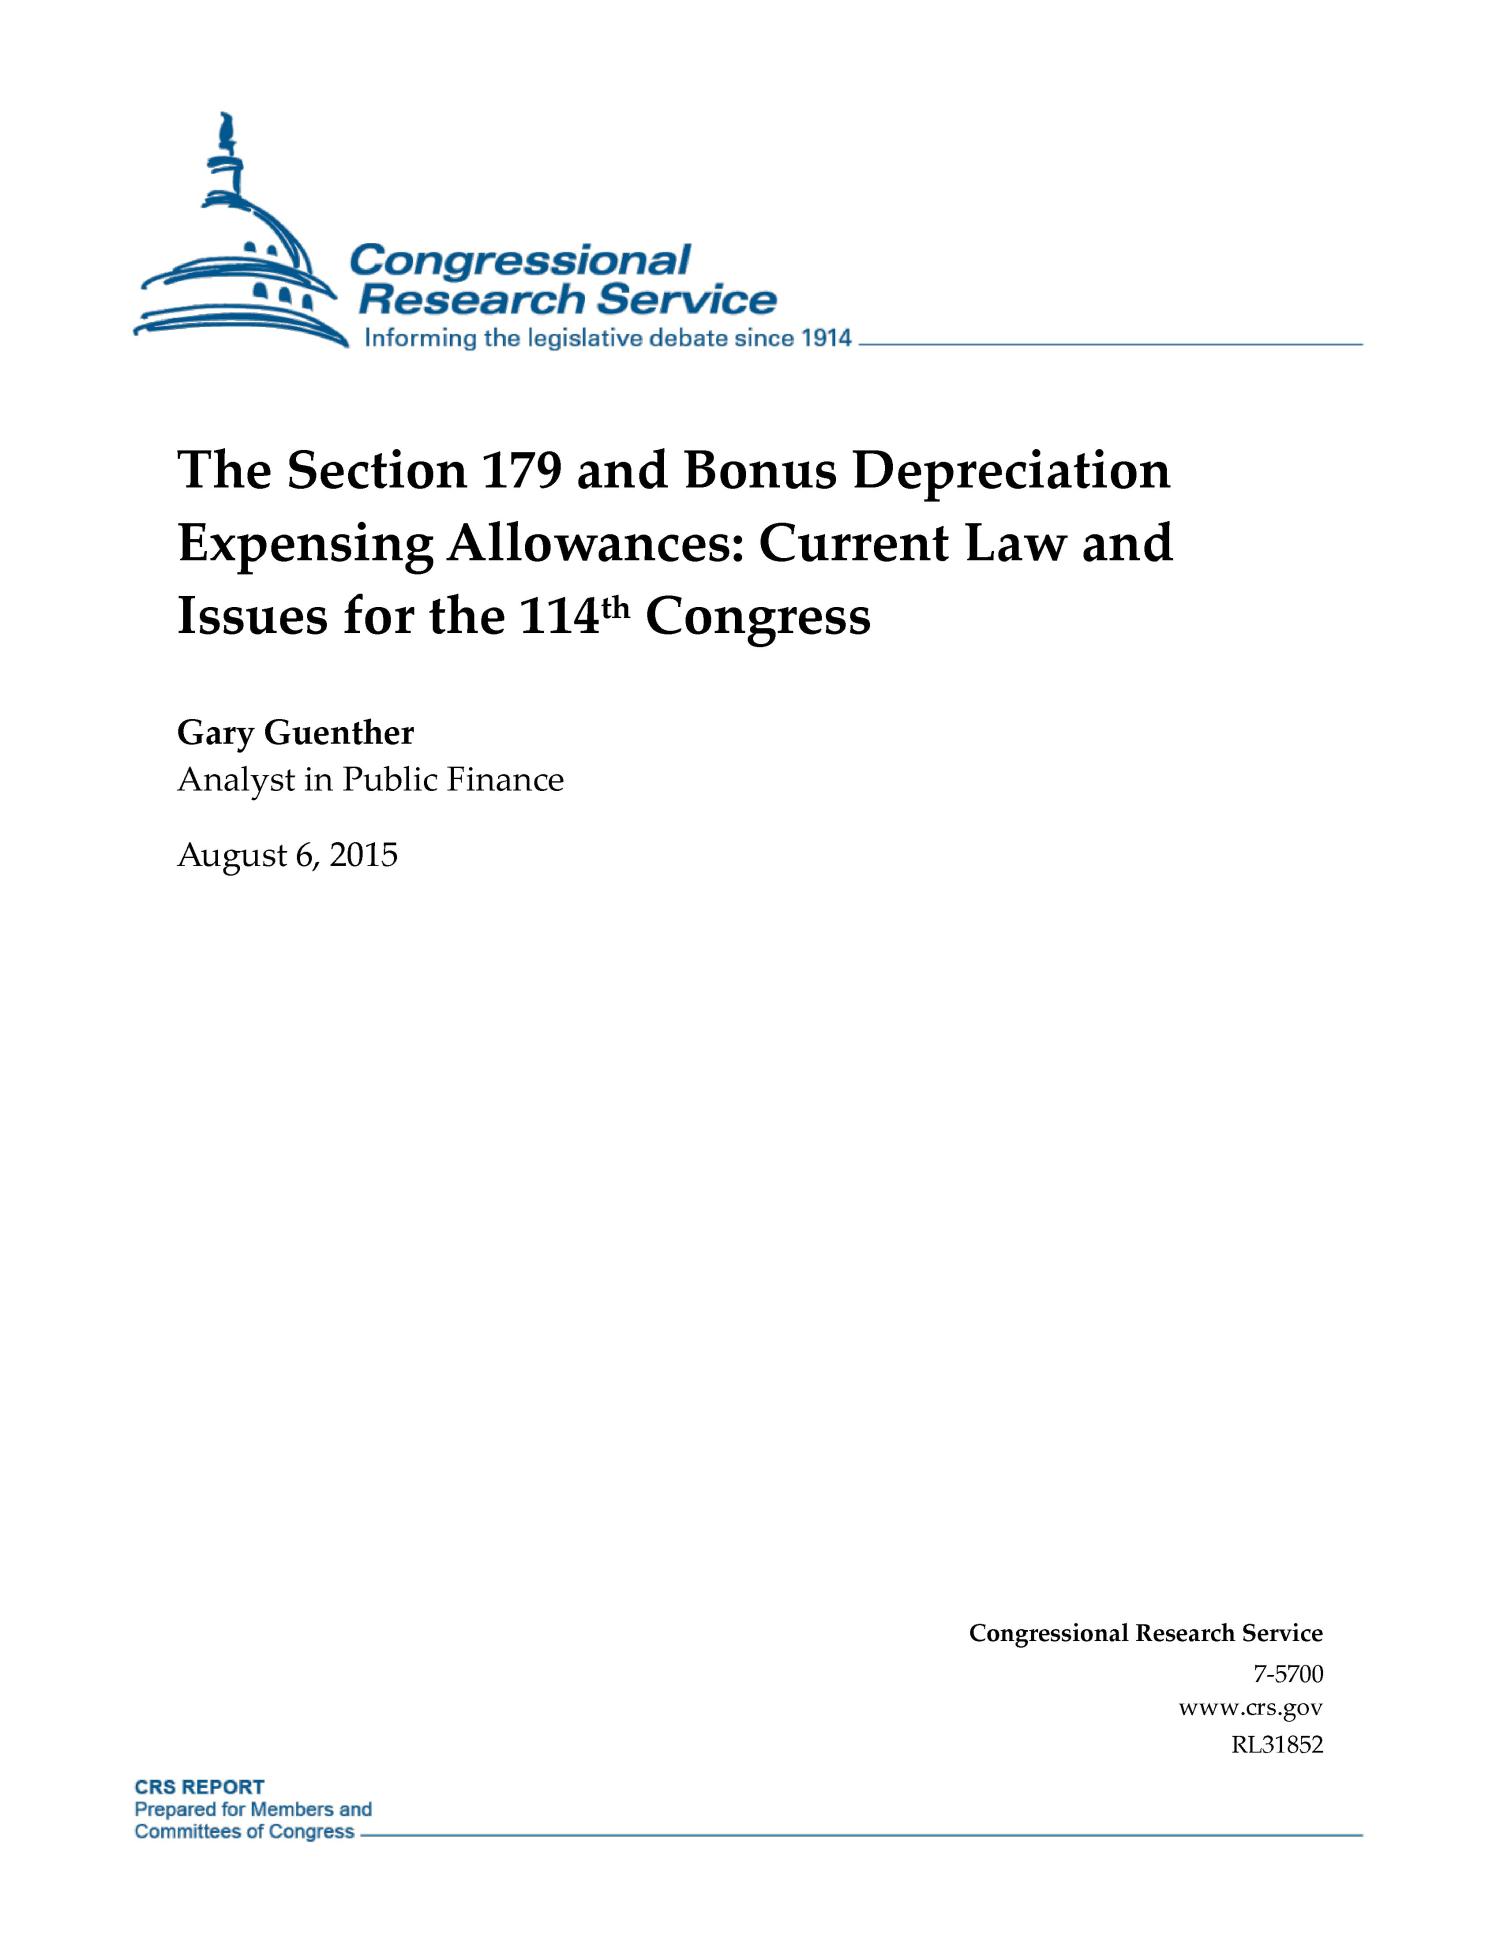 The Section 179 and Bonus Depreciation Expensing Allowances Current